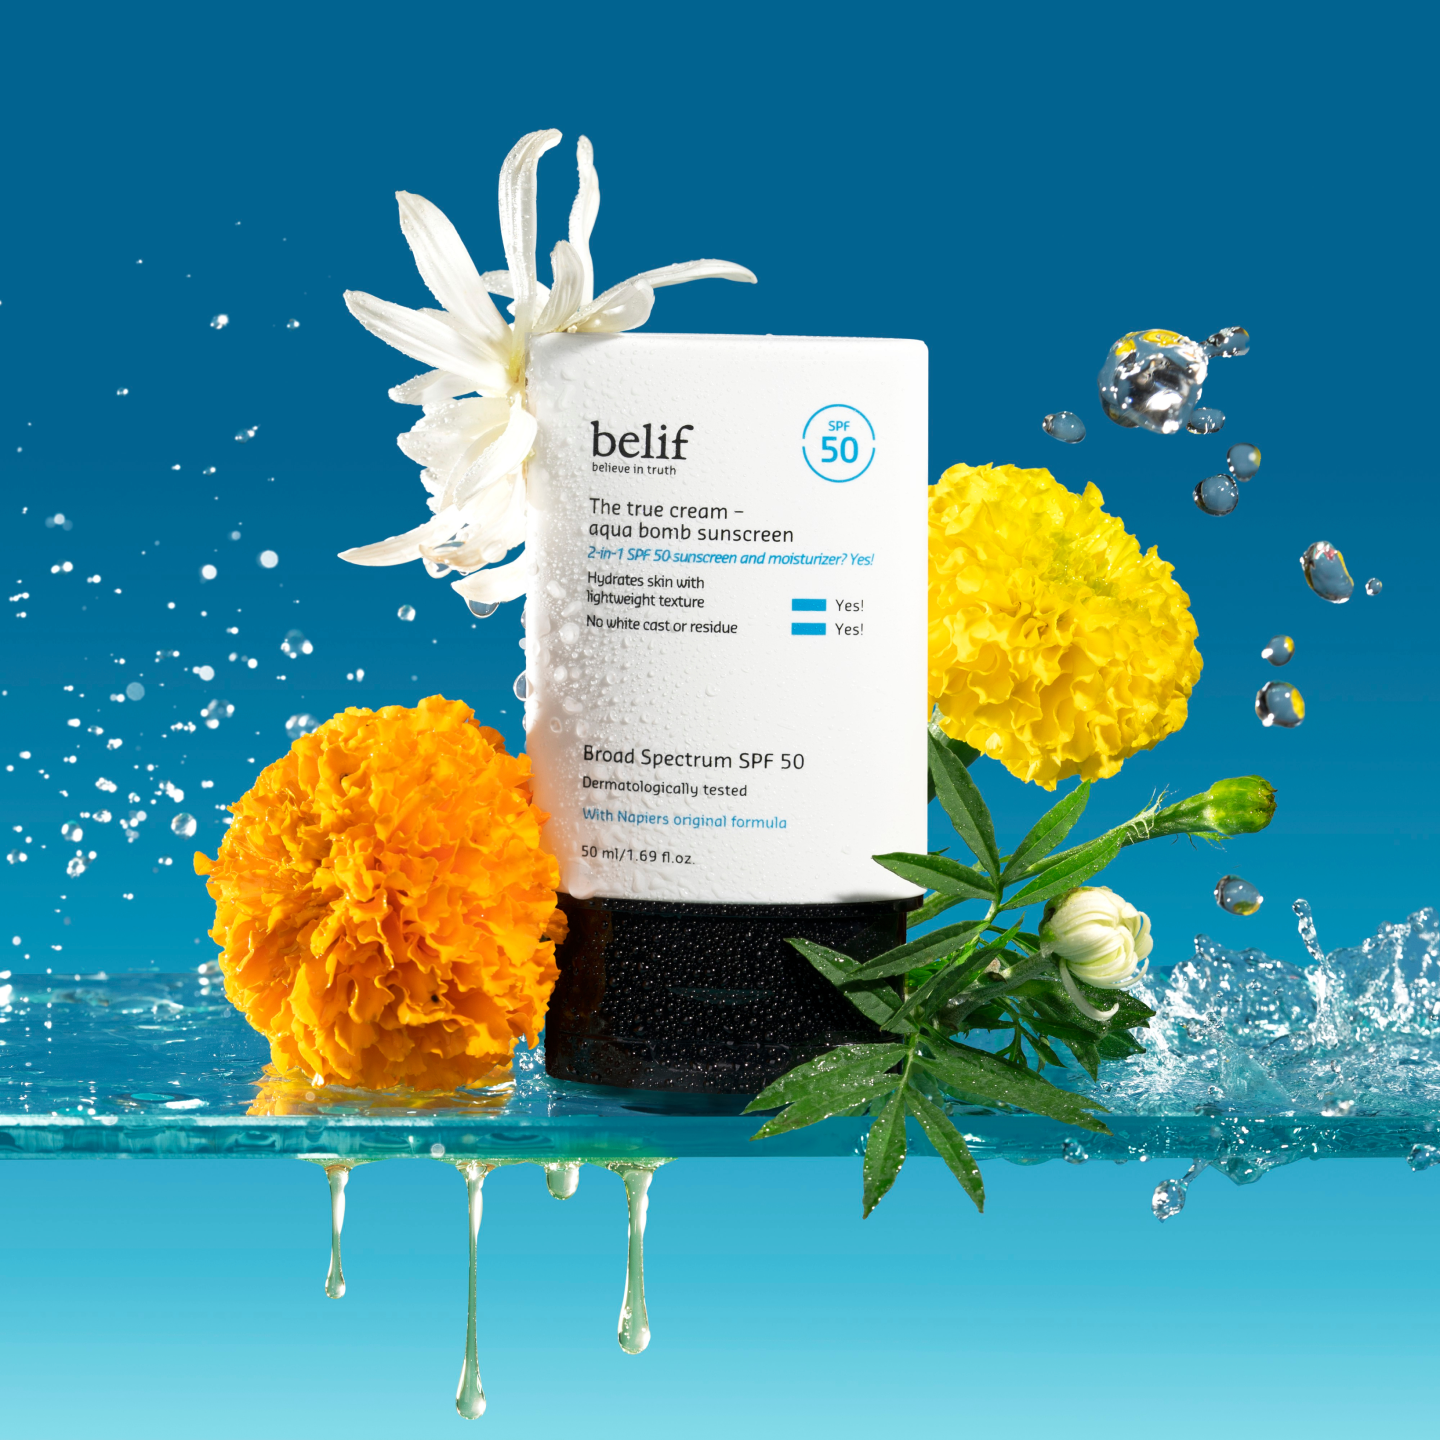 A tube of belif the true cream – aqua bomb sunscreen with a spread of floral & herbal ingredients for moisturization